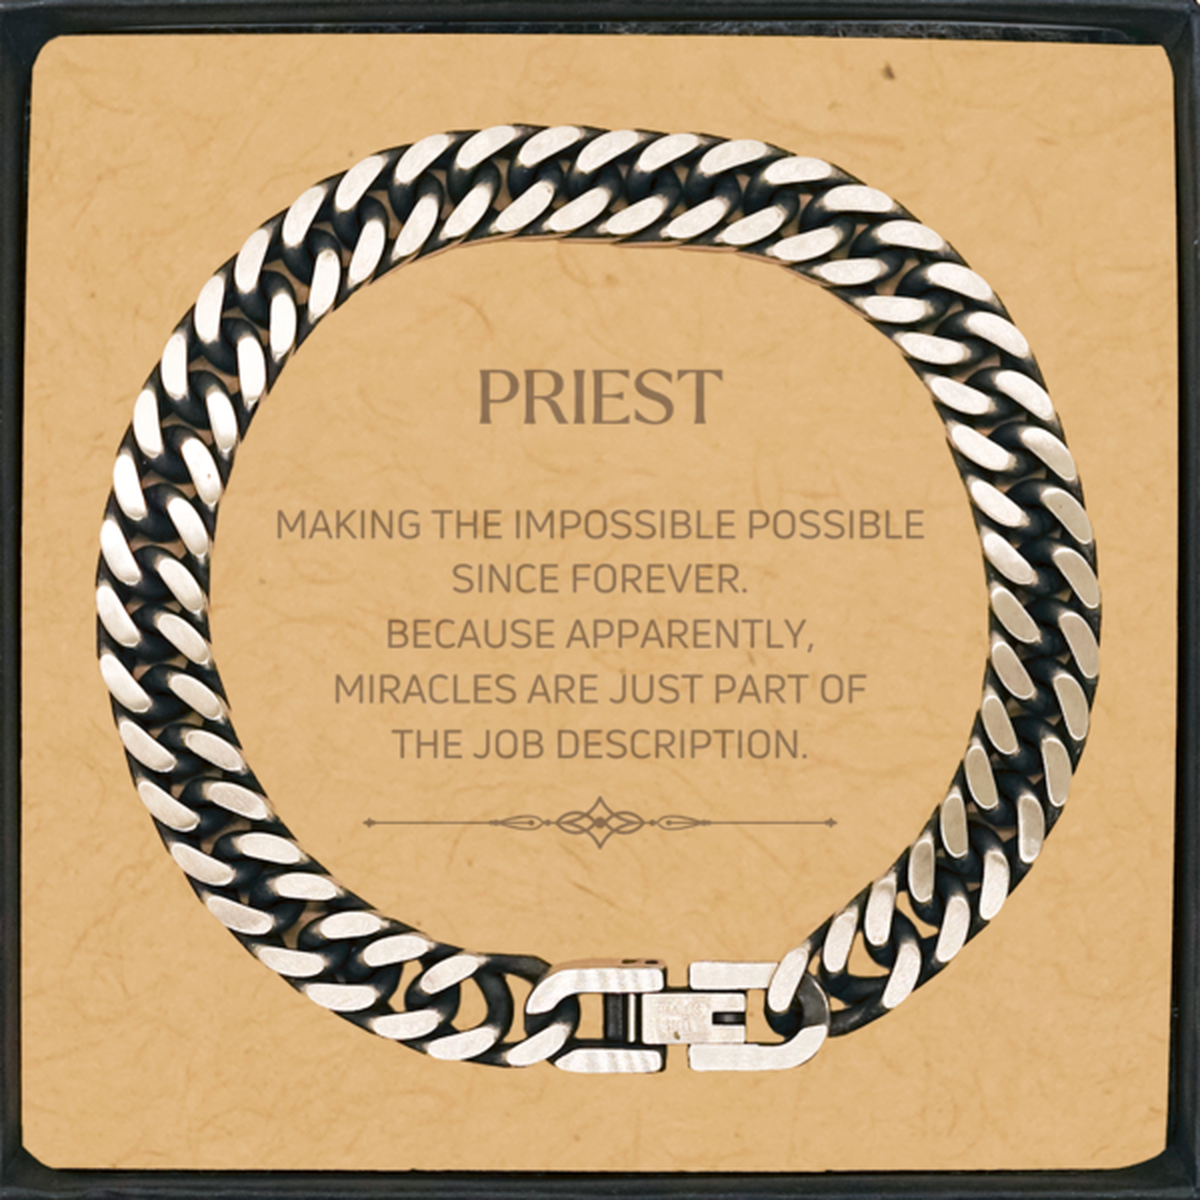 Funny Priest Gifts, Miracles are just part of the job description, Inspirational Birthday Cuban Link Chain Bracelet For Priest, Men, Women, Coworkers, Friends, Boss